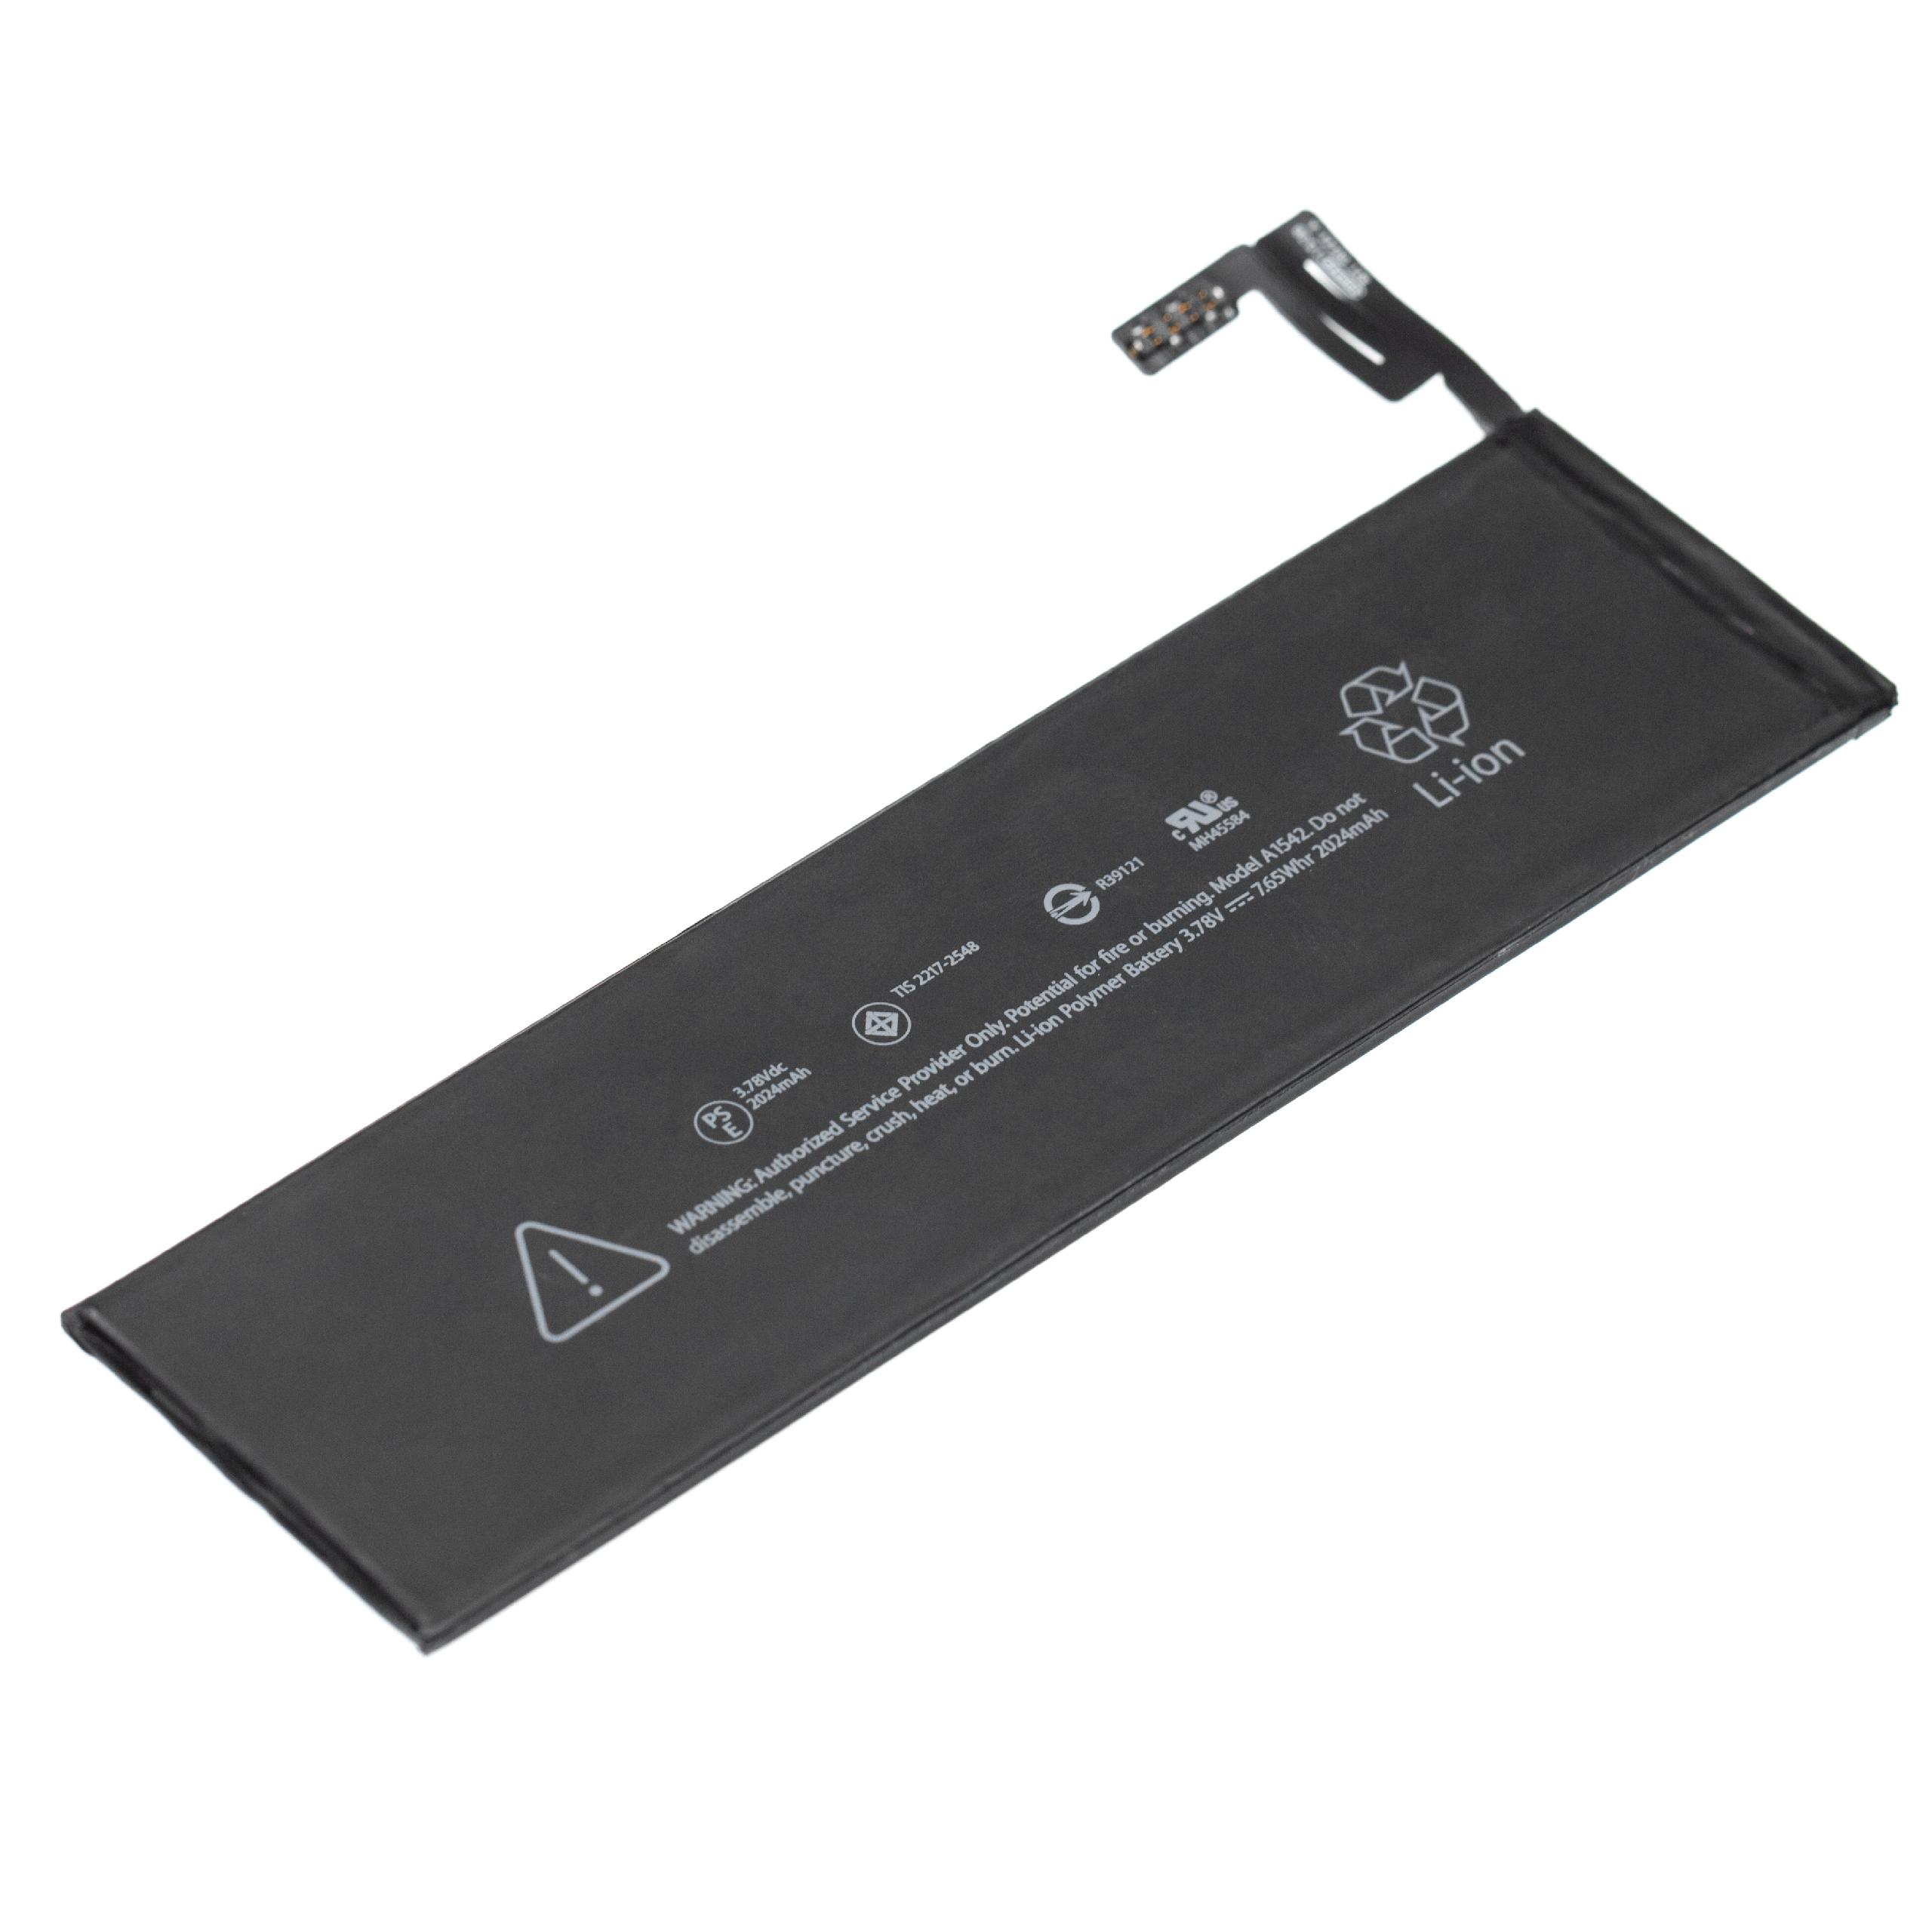 Wireless Touchpad Battery Replacement for Apple A1542 - 2024mAh 3.78V Li-polymer